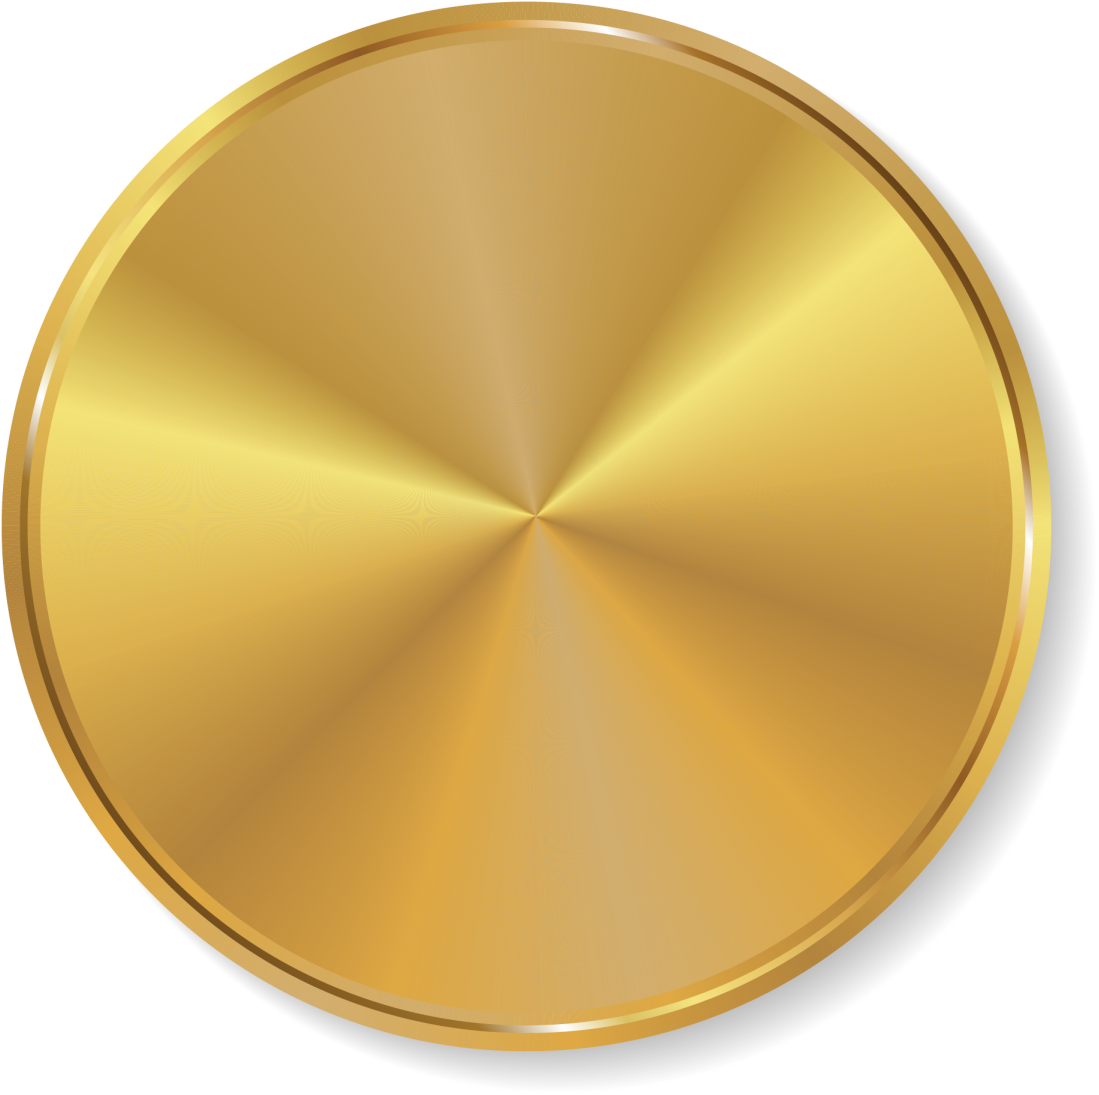 Shiny Gold Coin Graphic PNG